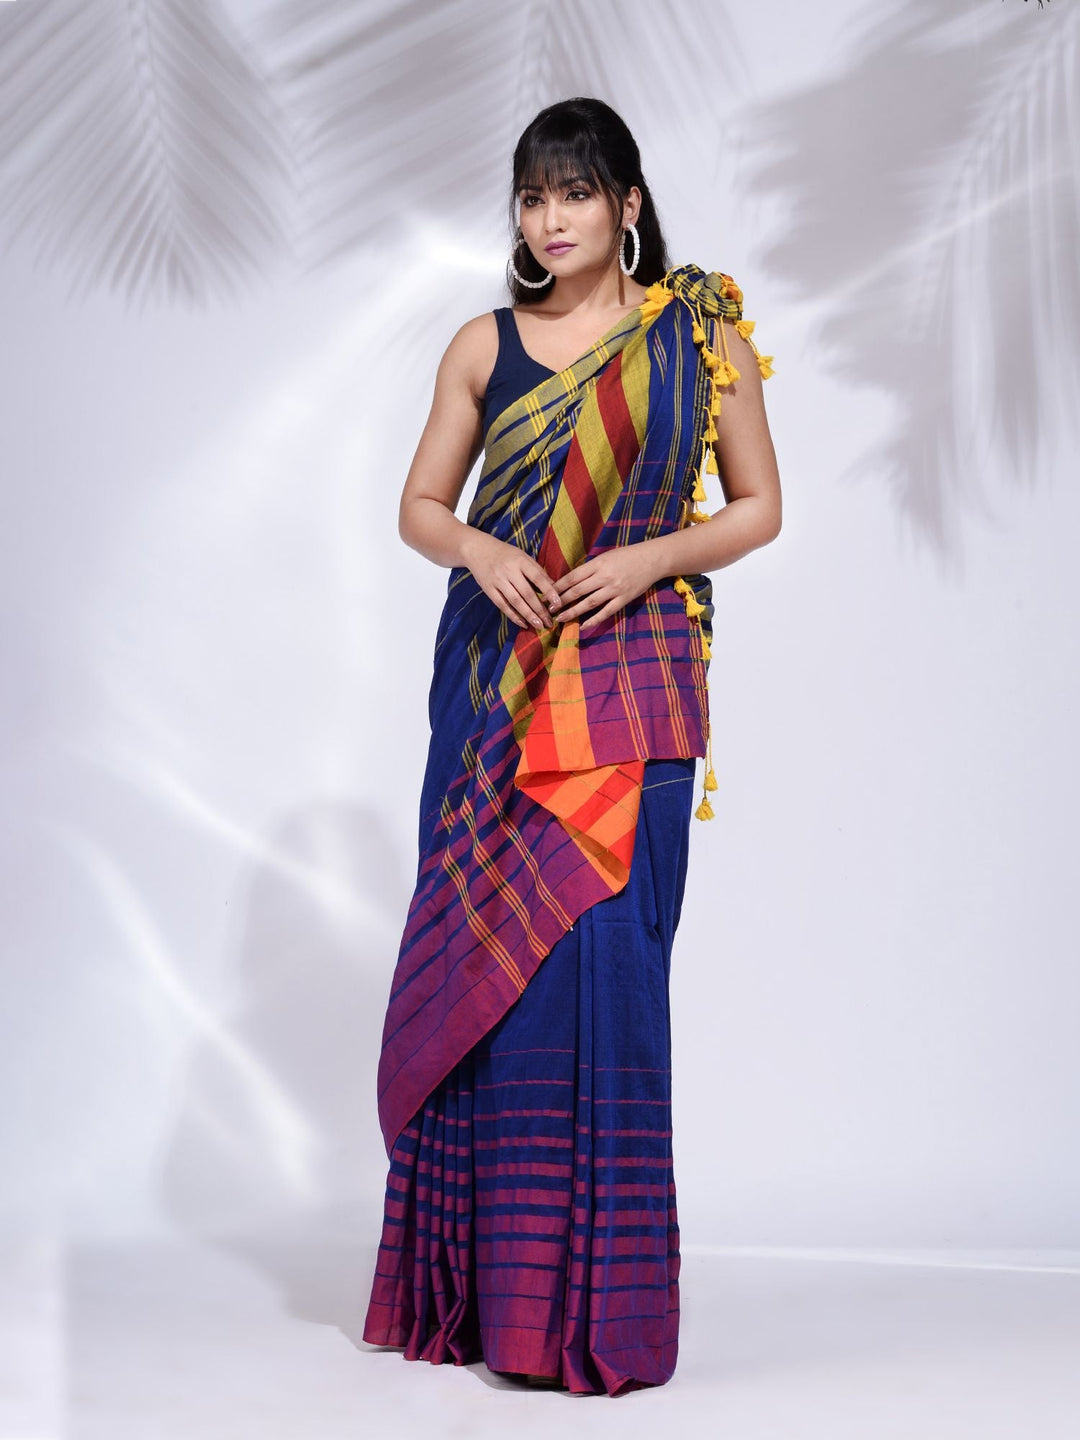 CHARUKRITI Royal Blue Pure Cotton Handwoven Saree with Stripe Border with Unstitched Blouse